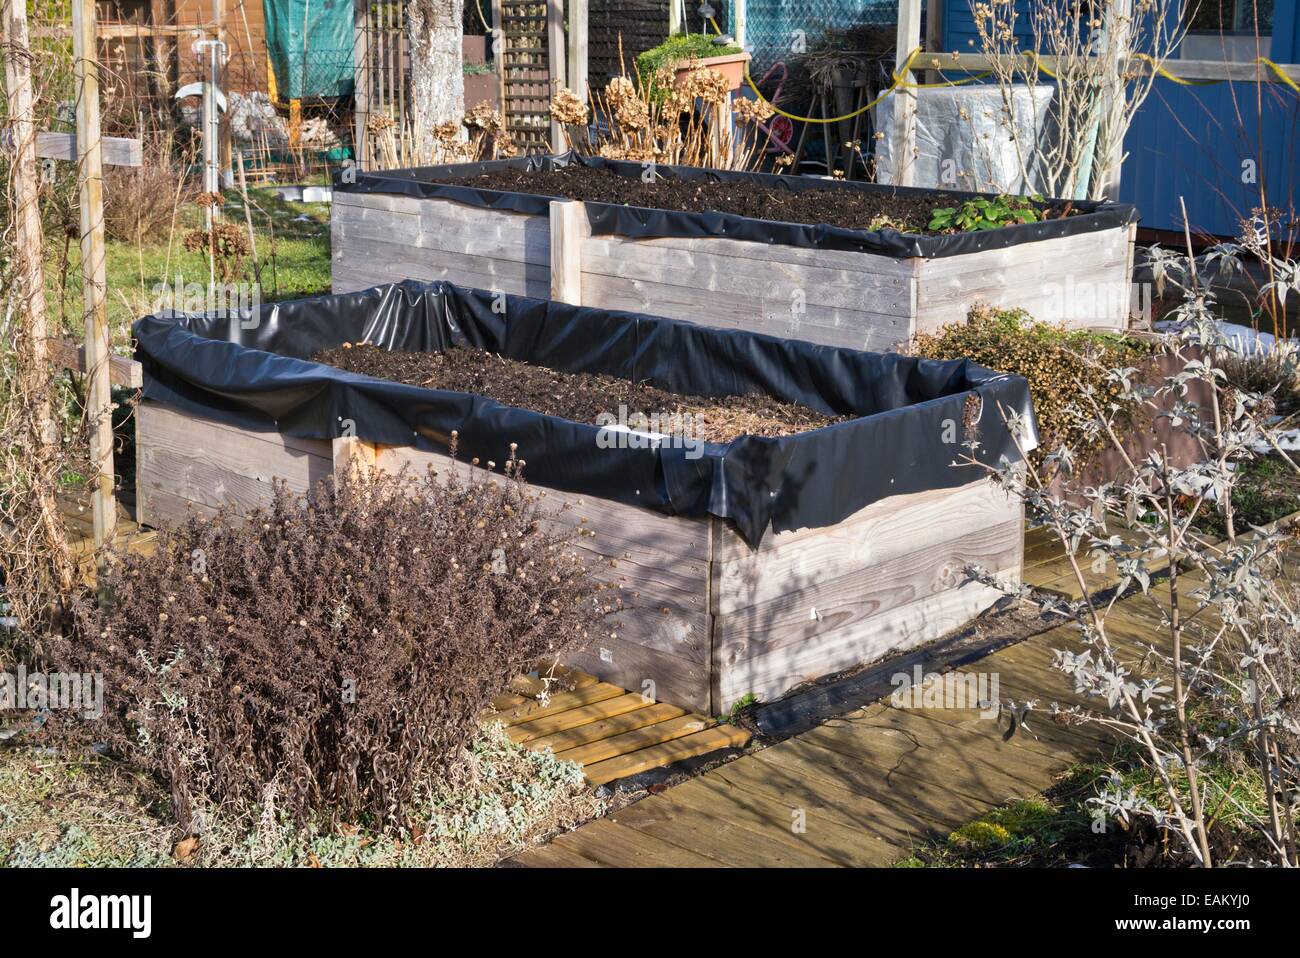 Raised beds in a wintery allotment garden Stock Photo